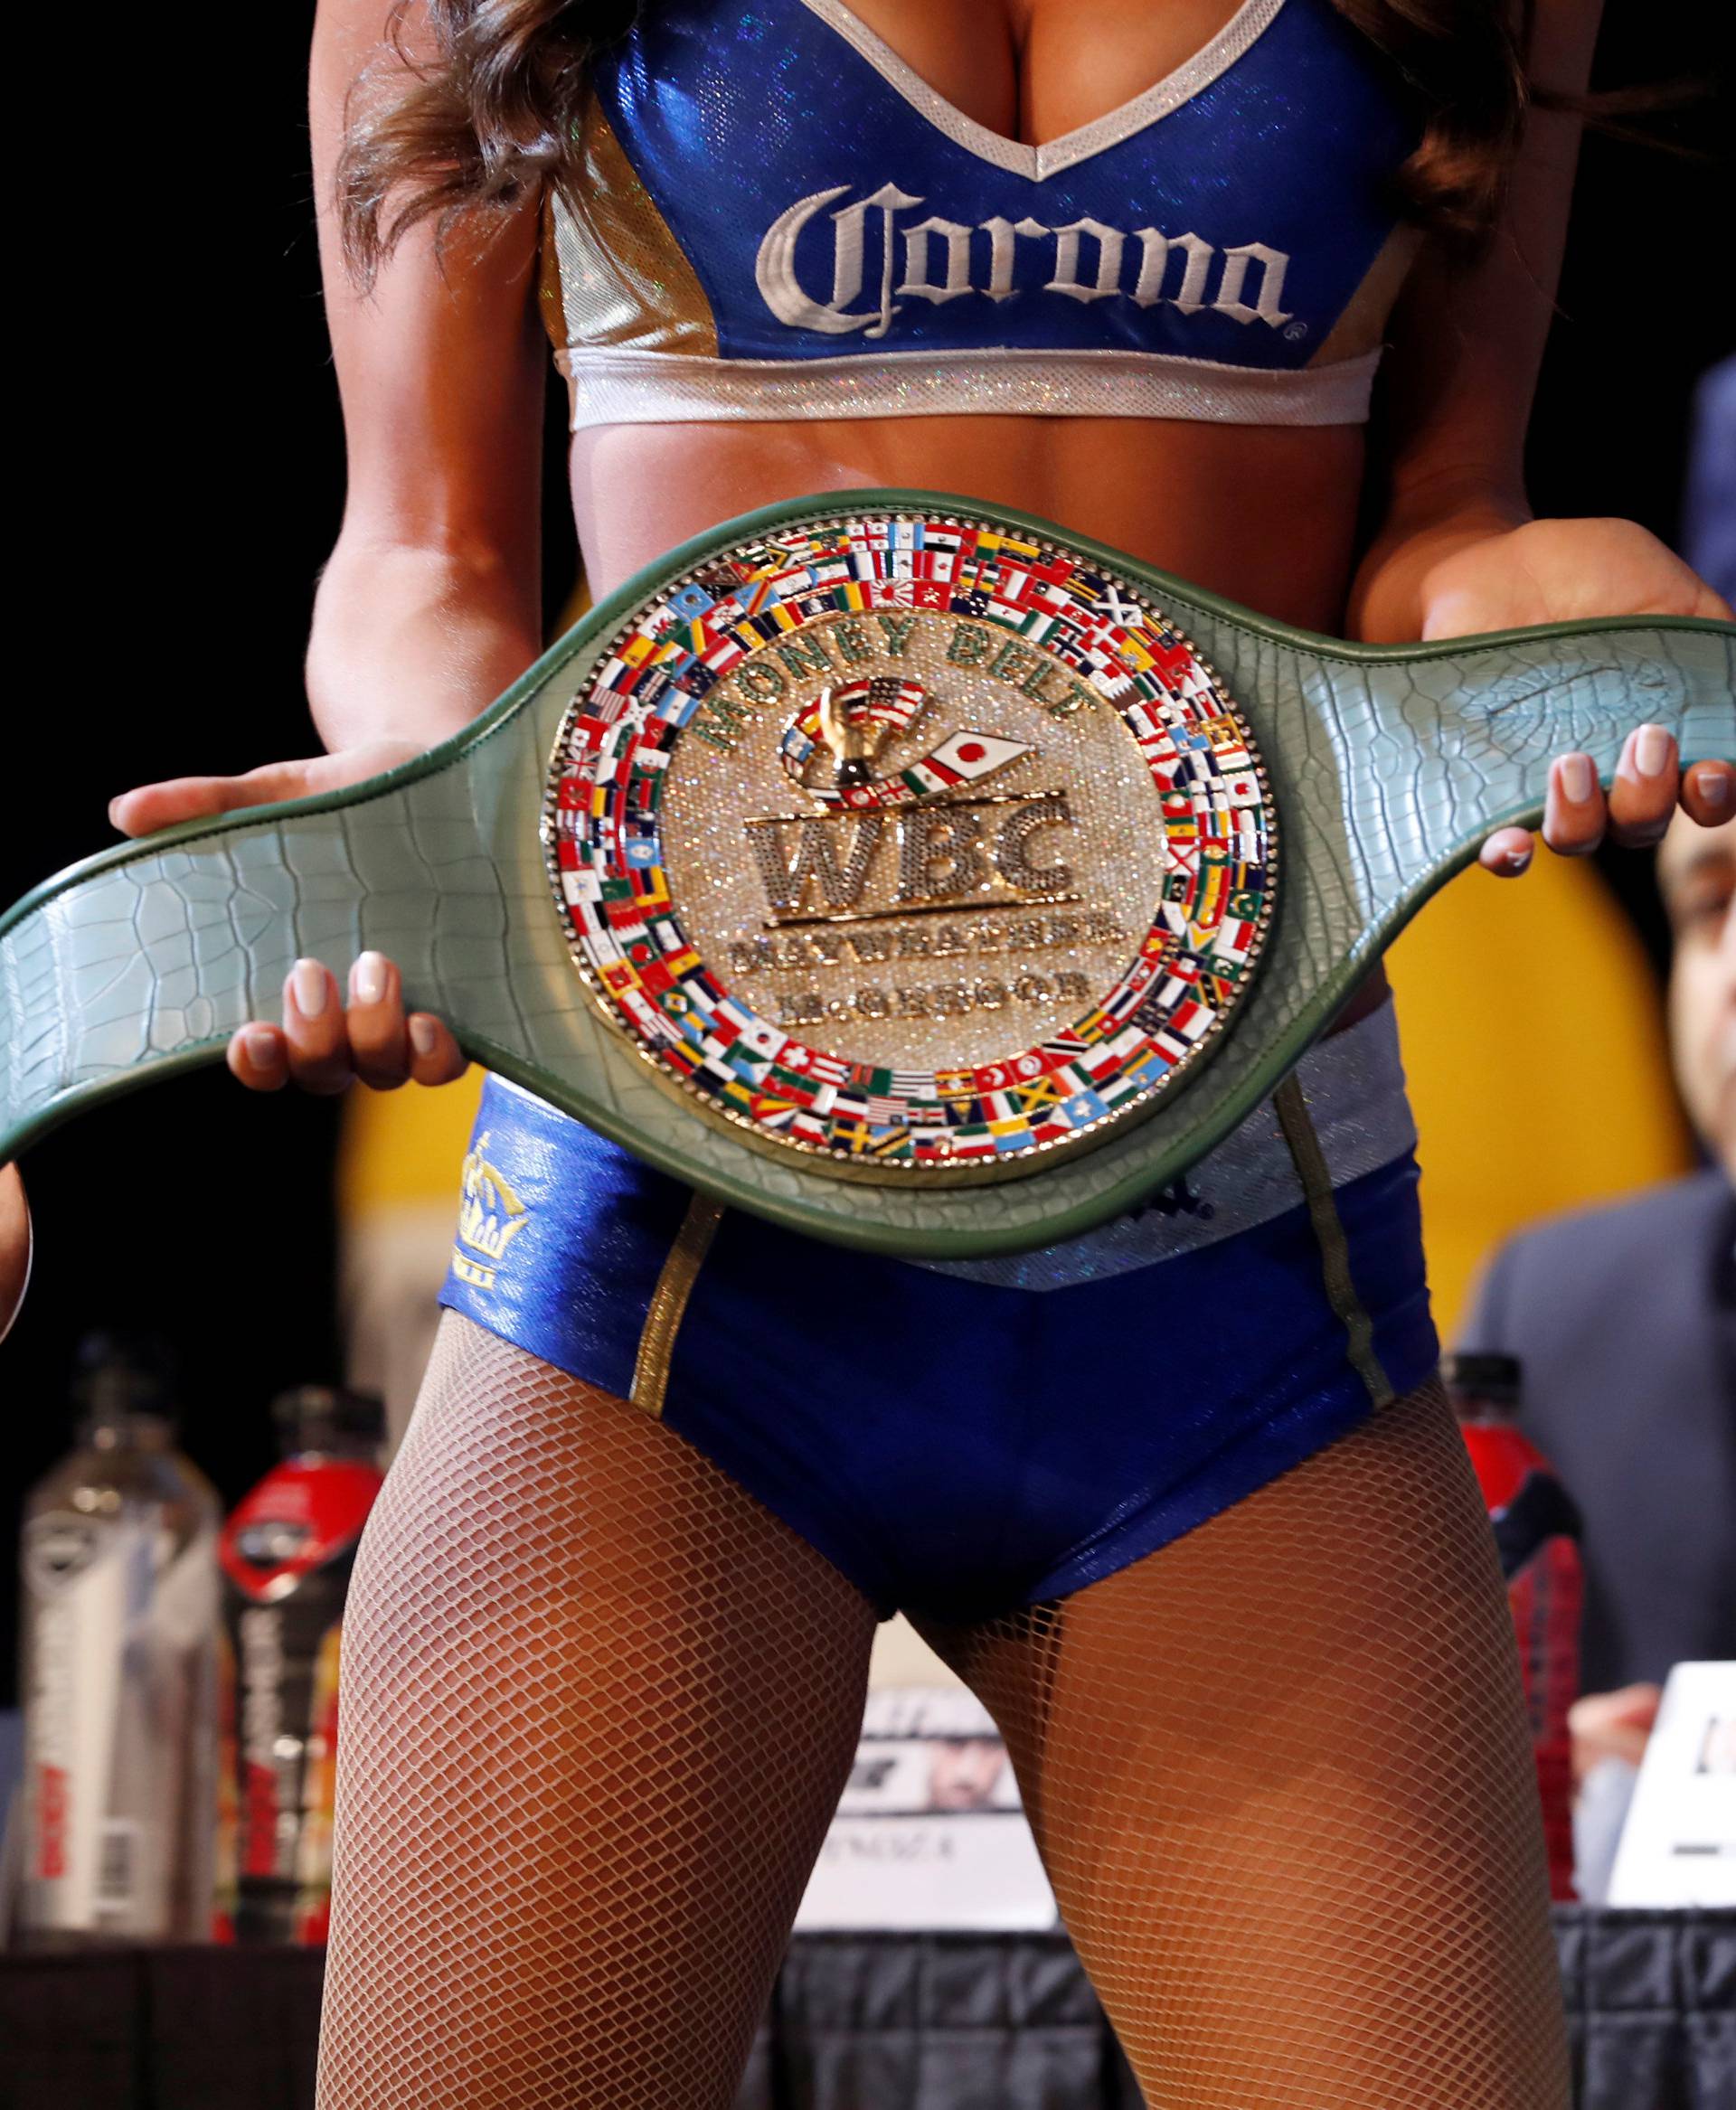 The WBC "Money Belt" is displayed during a news conference with undefeated boxer Floyd Mayweather Jr. of the U.S. and UFC lightweight champion Conor McGregor of Ireland in Las Vegas